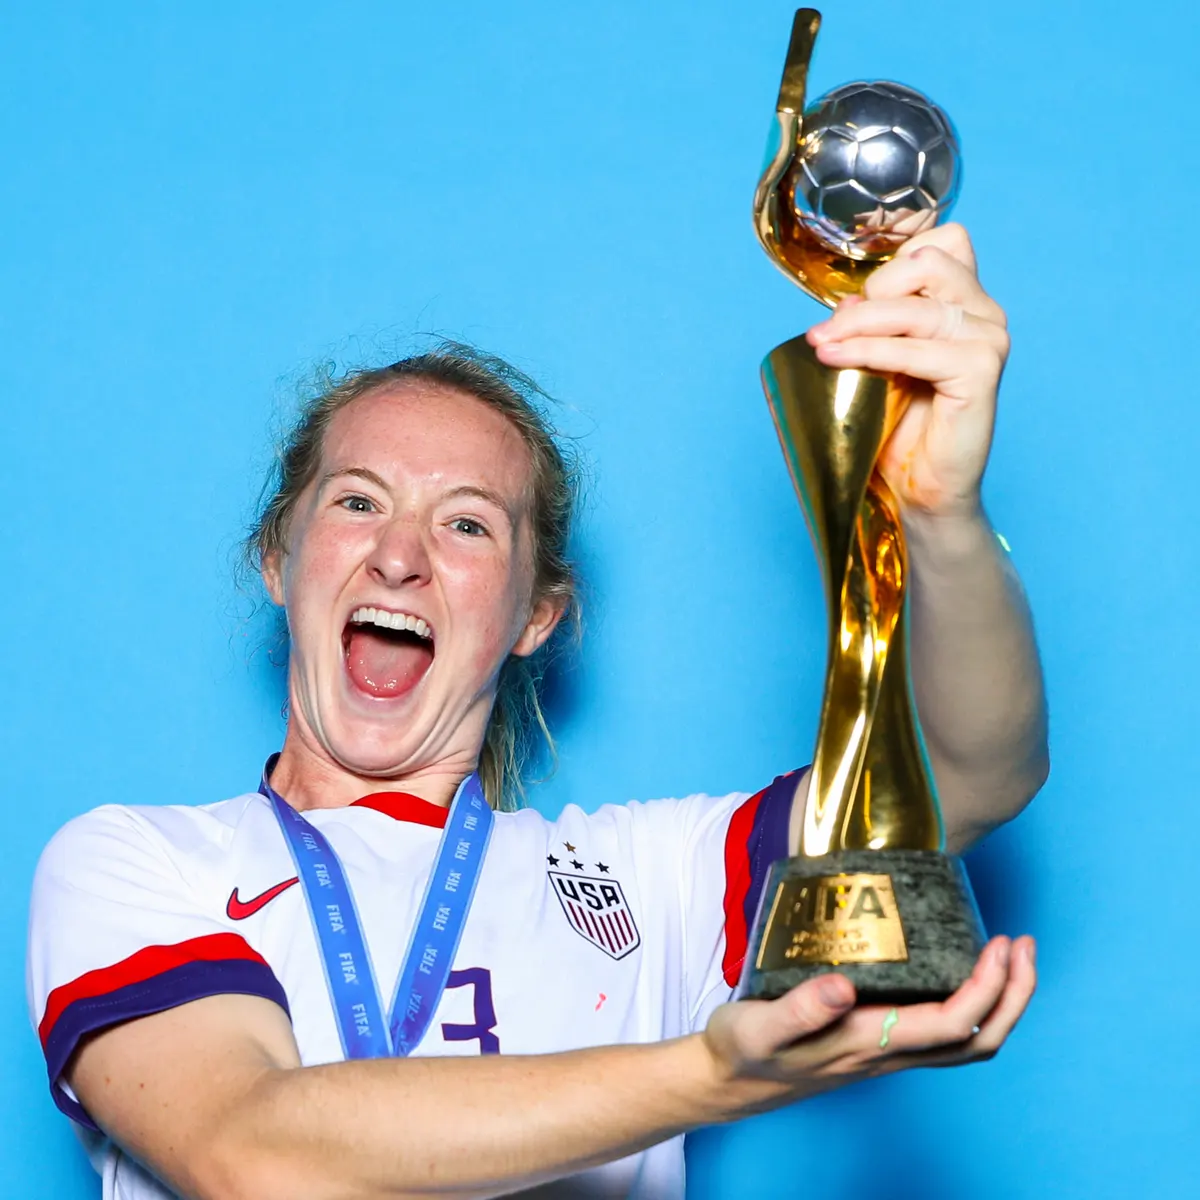 Mewis With The Women's World Cup Trophy